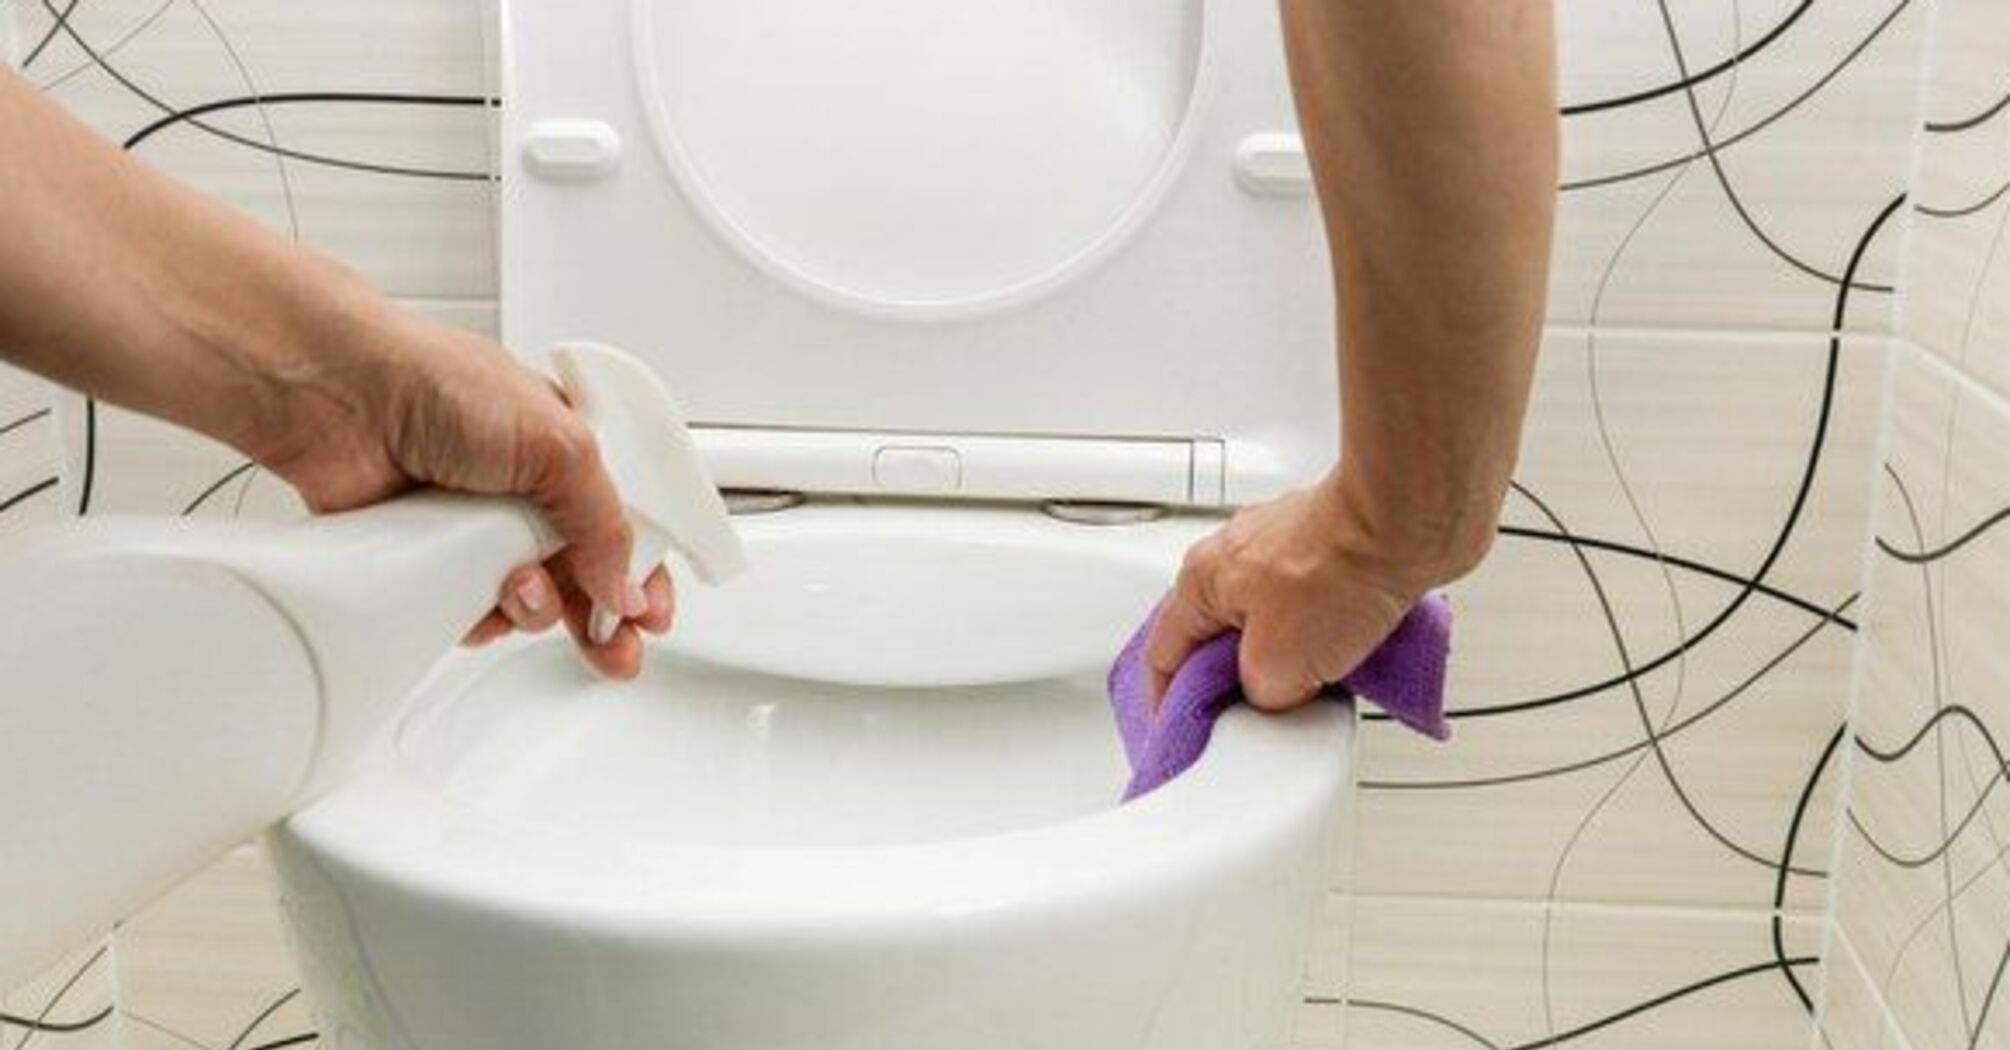 How to quickly get rid of limescale on the toilet: Effective remedies